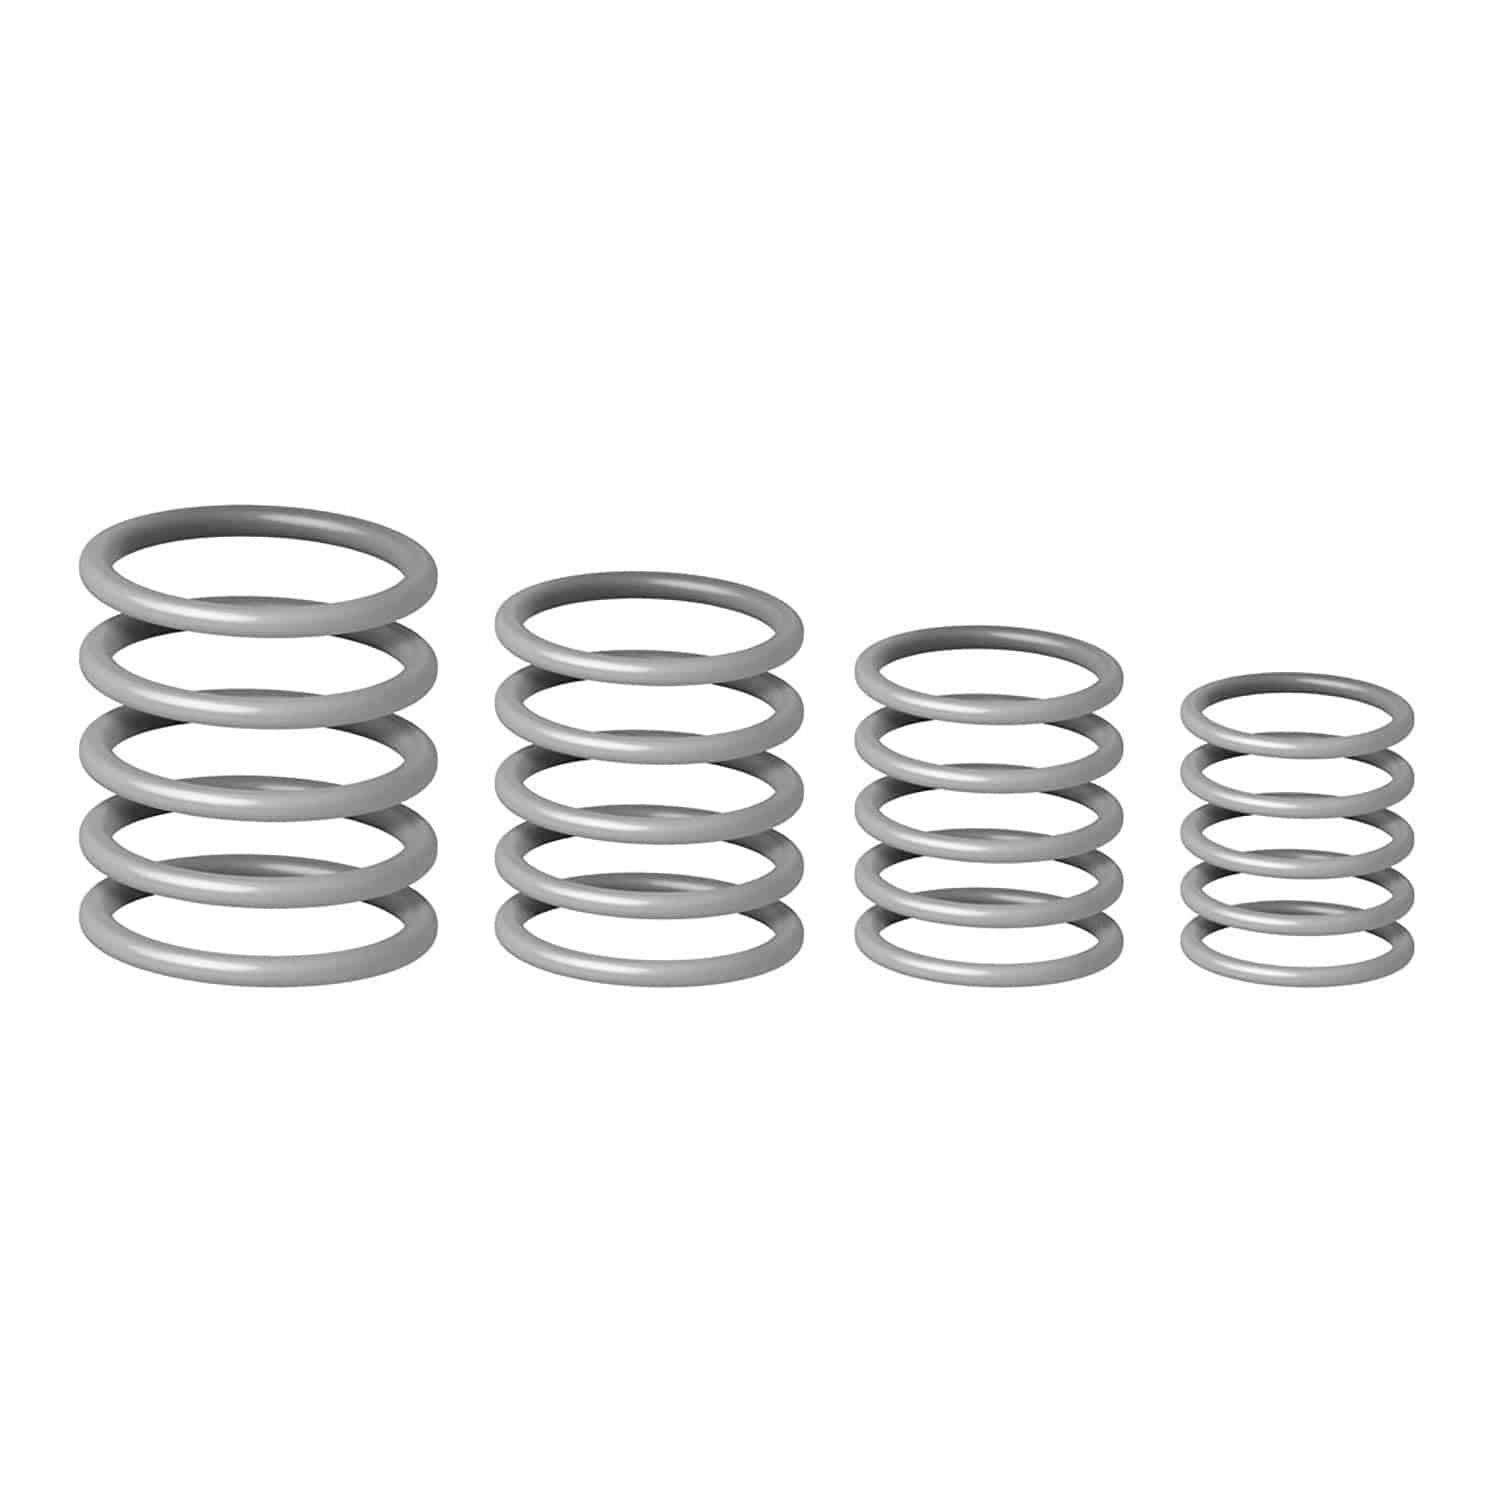 Gravity GRP5555GRY1 Universal Gravity Ring Pack, Concrete Grey - Hollywood DJ